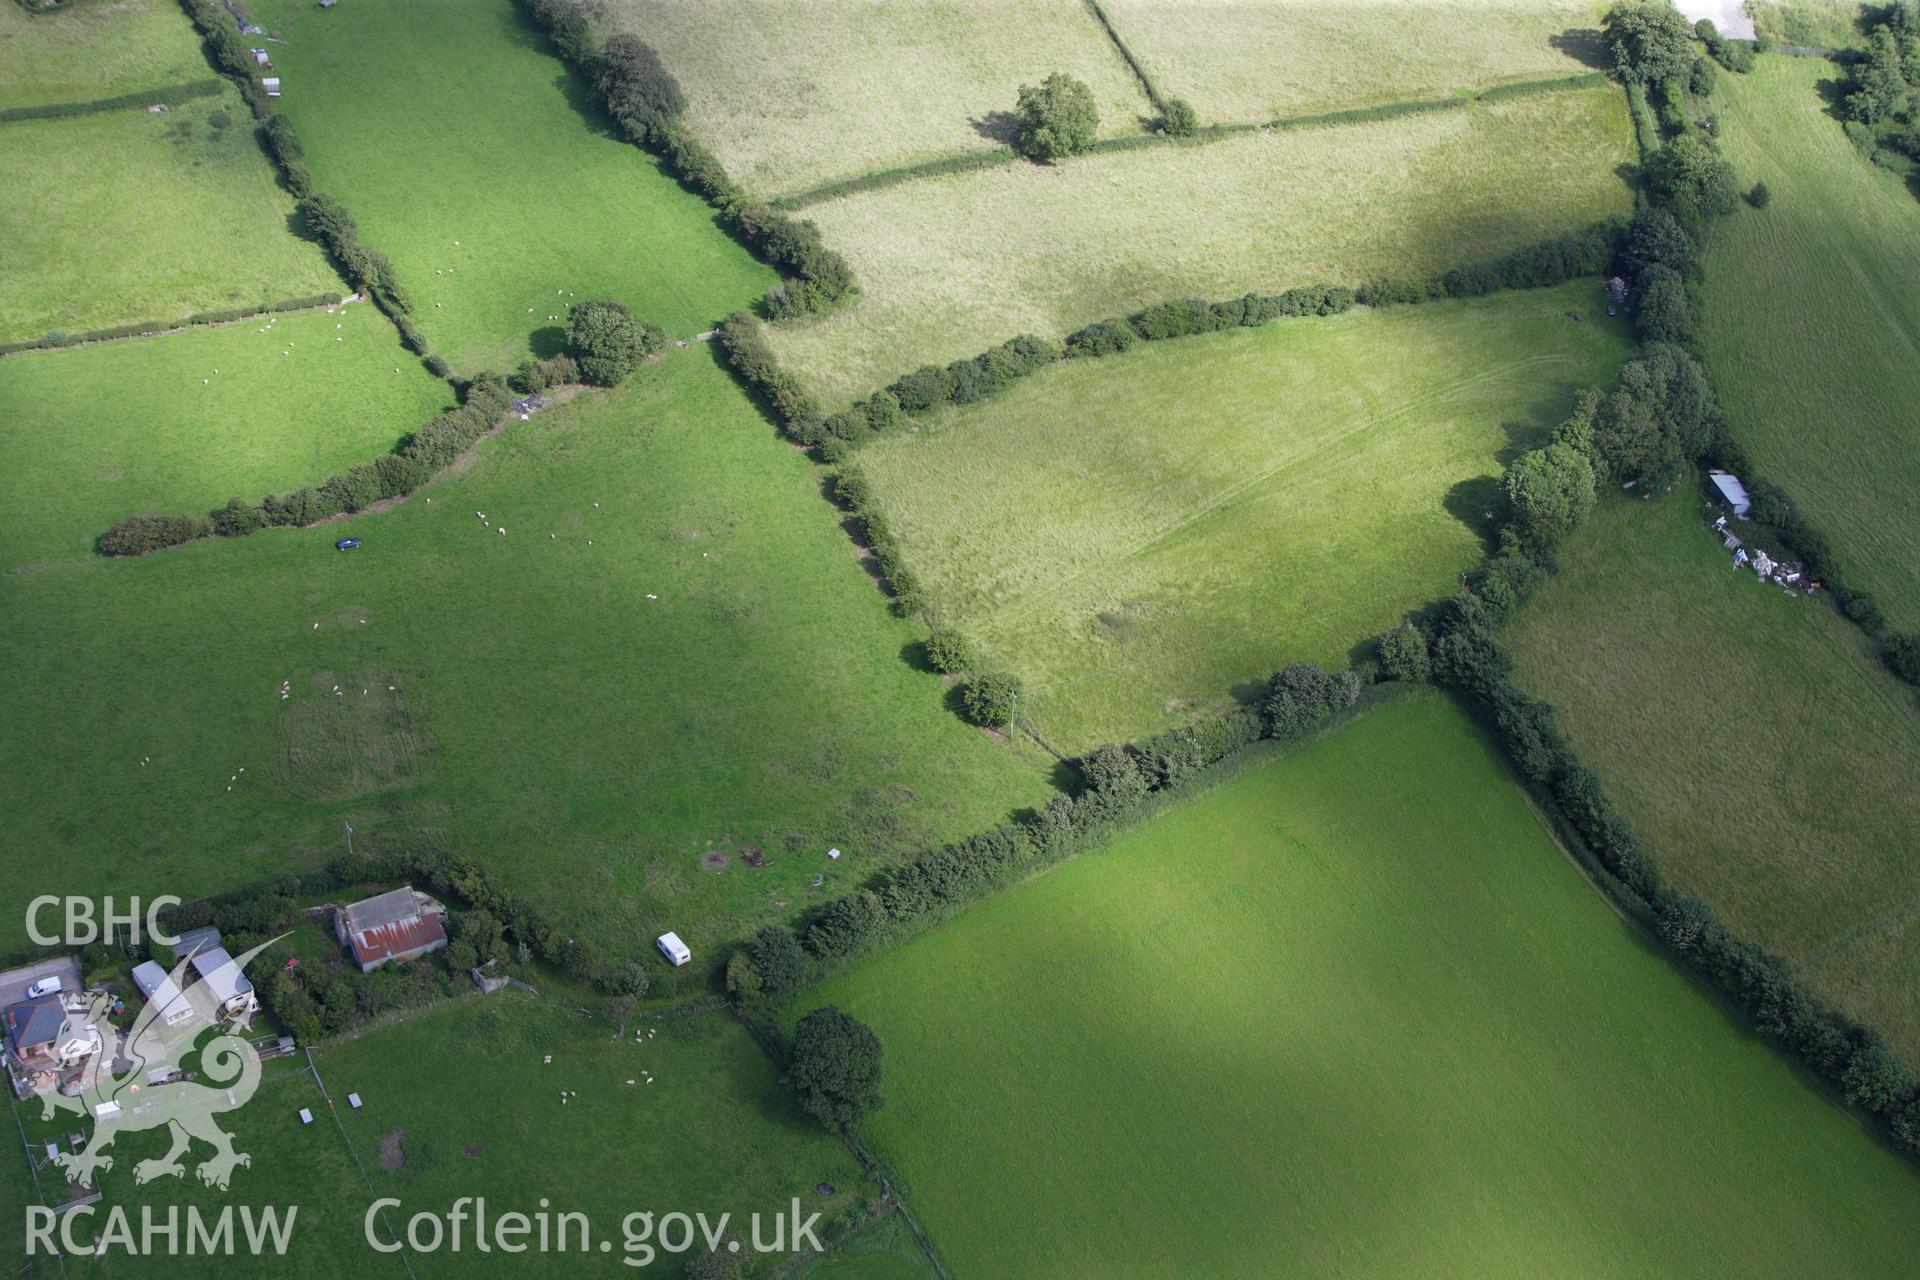 RCAHMW colour oblique aerial photograph of round barrow at Hen Dy. Taken on 30 July 2009 by Toby Driver